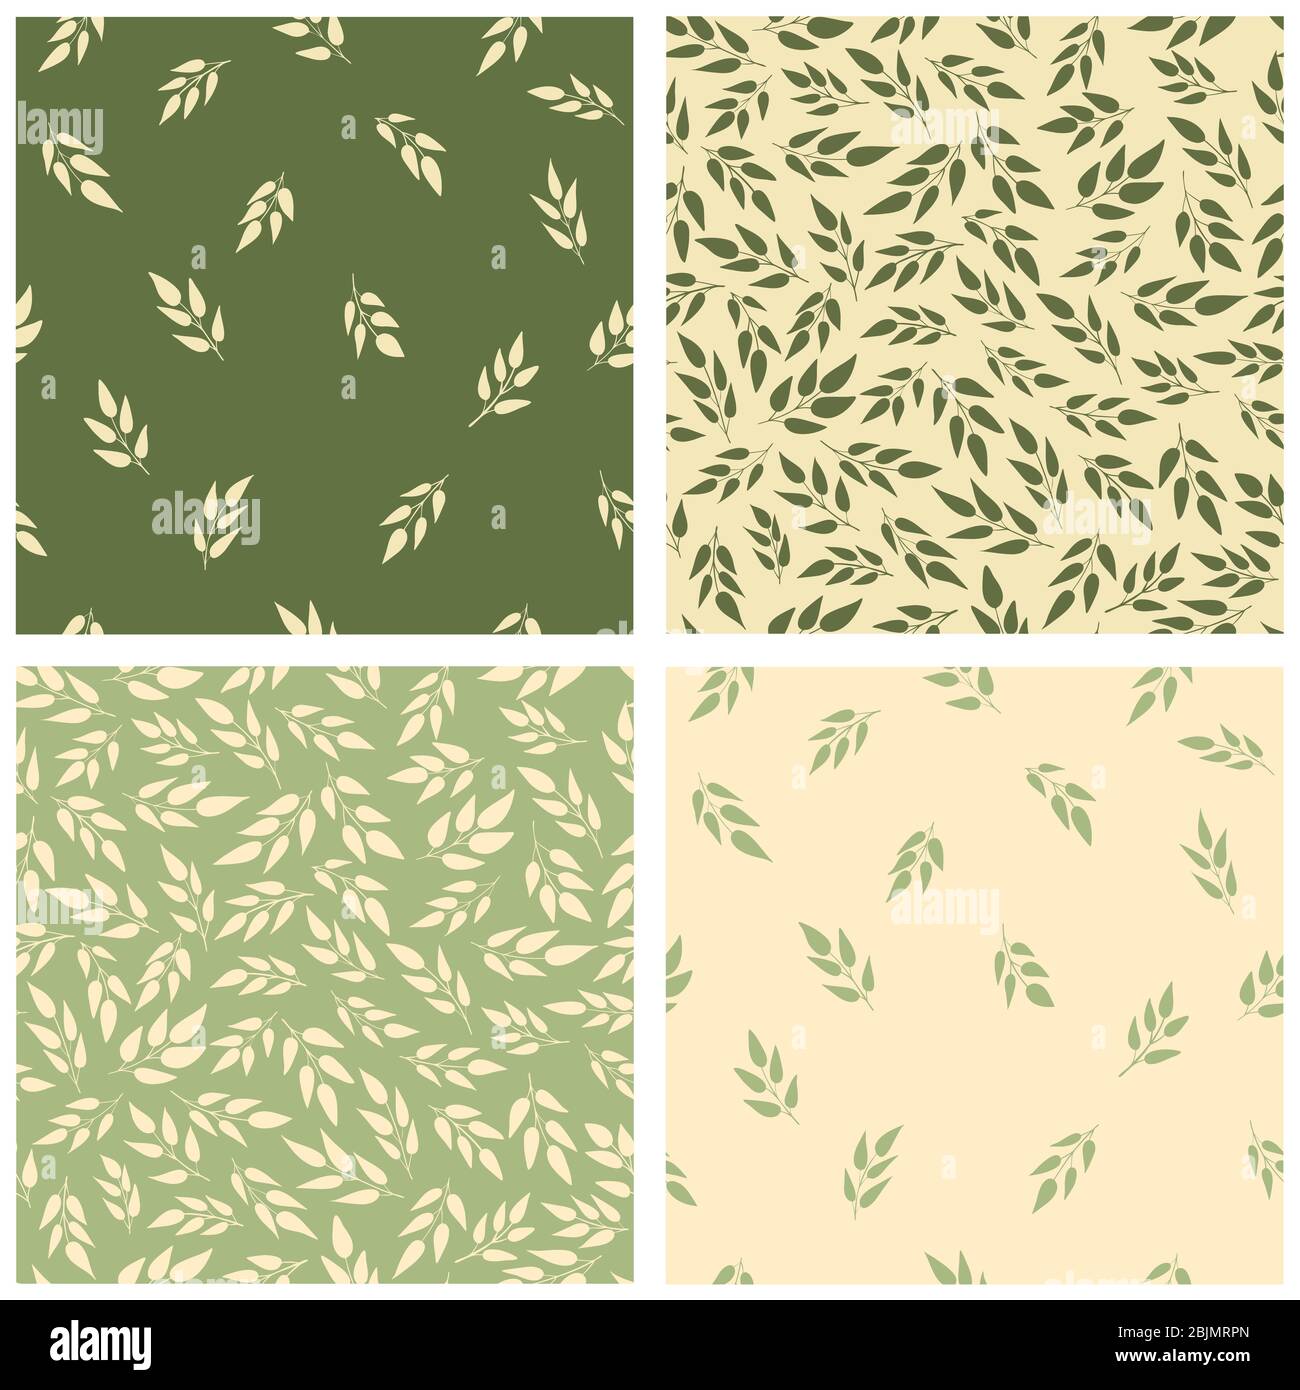 Set of 4 Simple Floral Vector Seamless Patterns. Green, beige Leaves on a light Background. Lovely Repeatable Spring Layouts. Soft Green Stock Vector